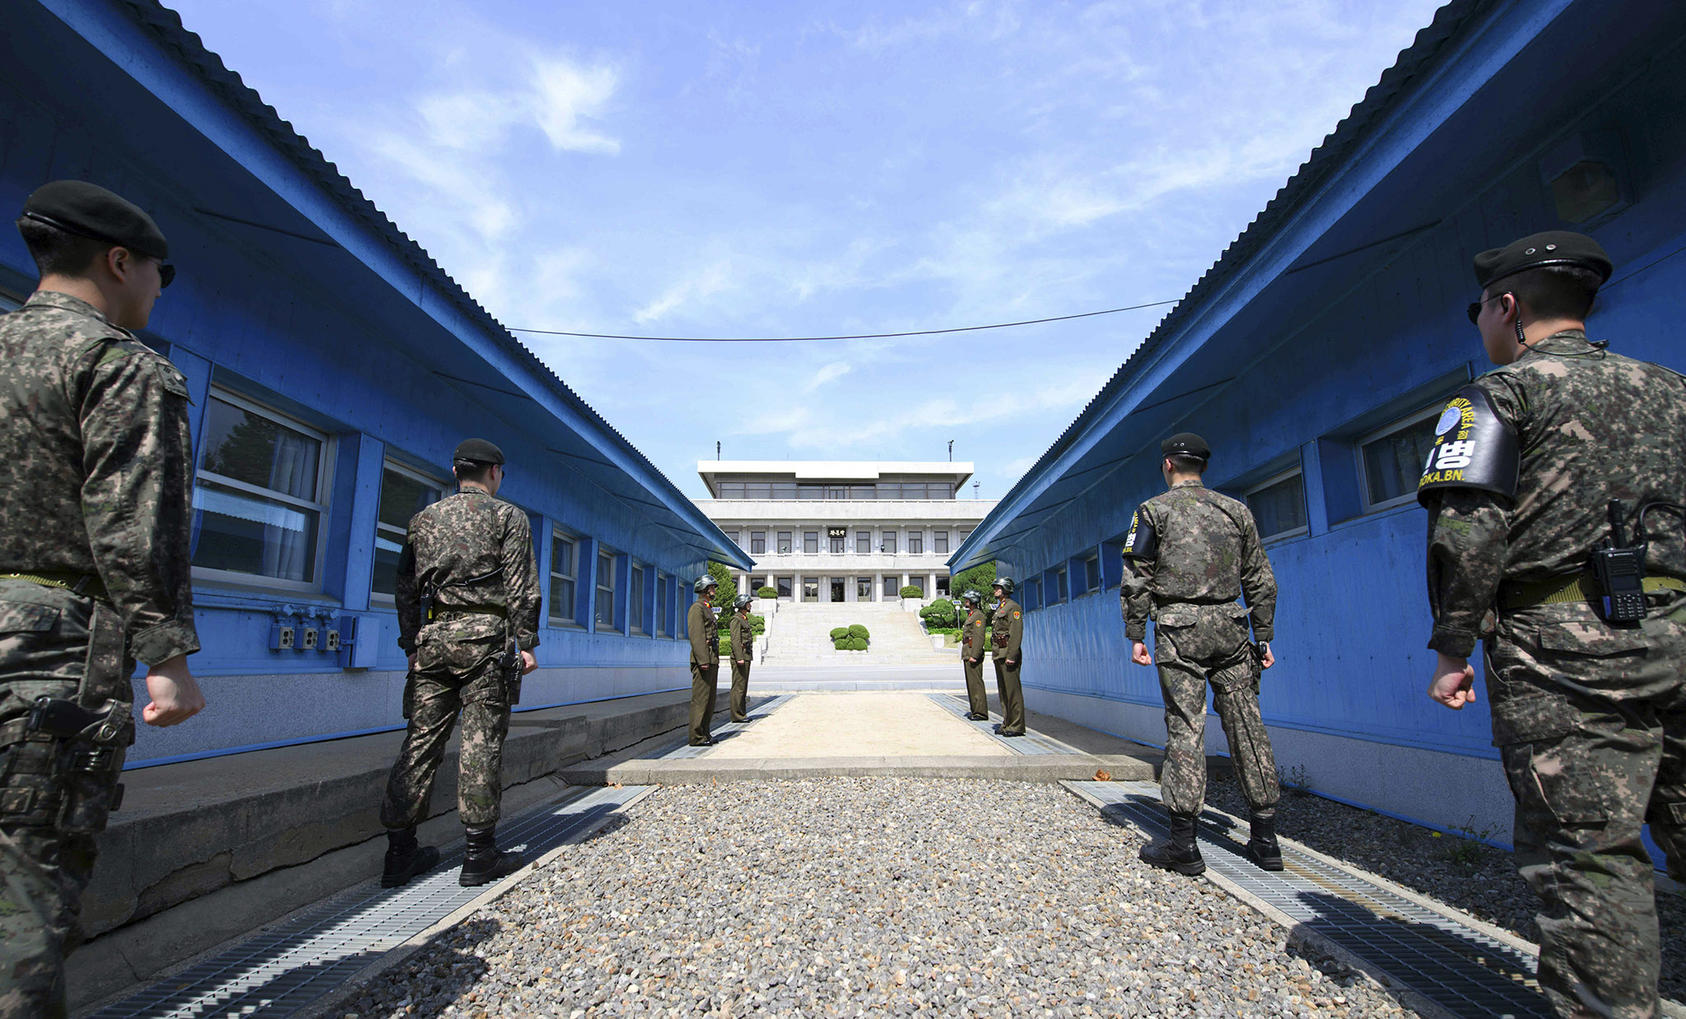 South Korean soldiers, front, and North Korean soldiers, rear, stand guard on either side of the Military Demarcation Line of the Demilitarized Zone dividing the two nations. (Korea Summit Press Pool via New York Times)